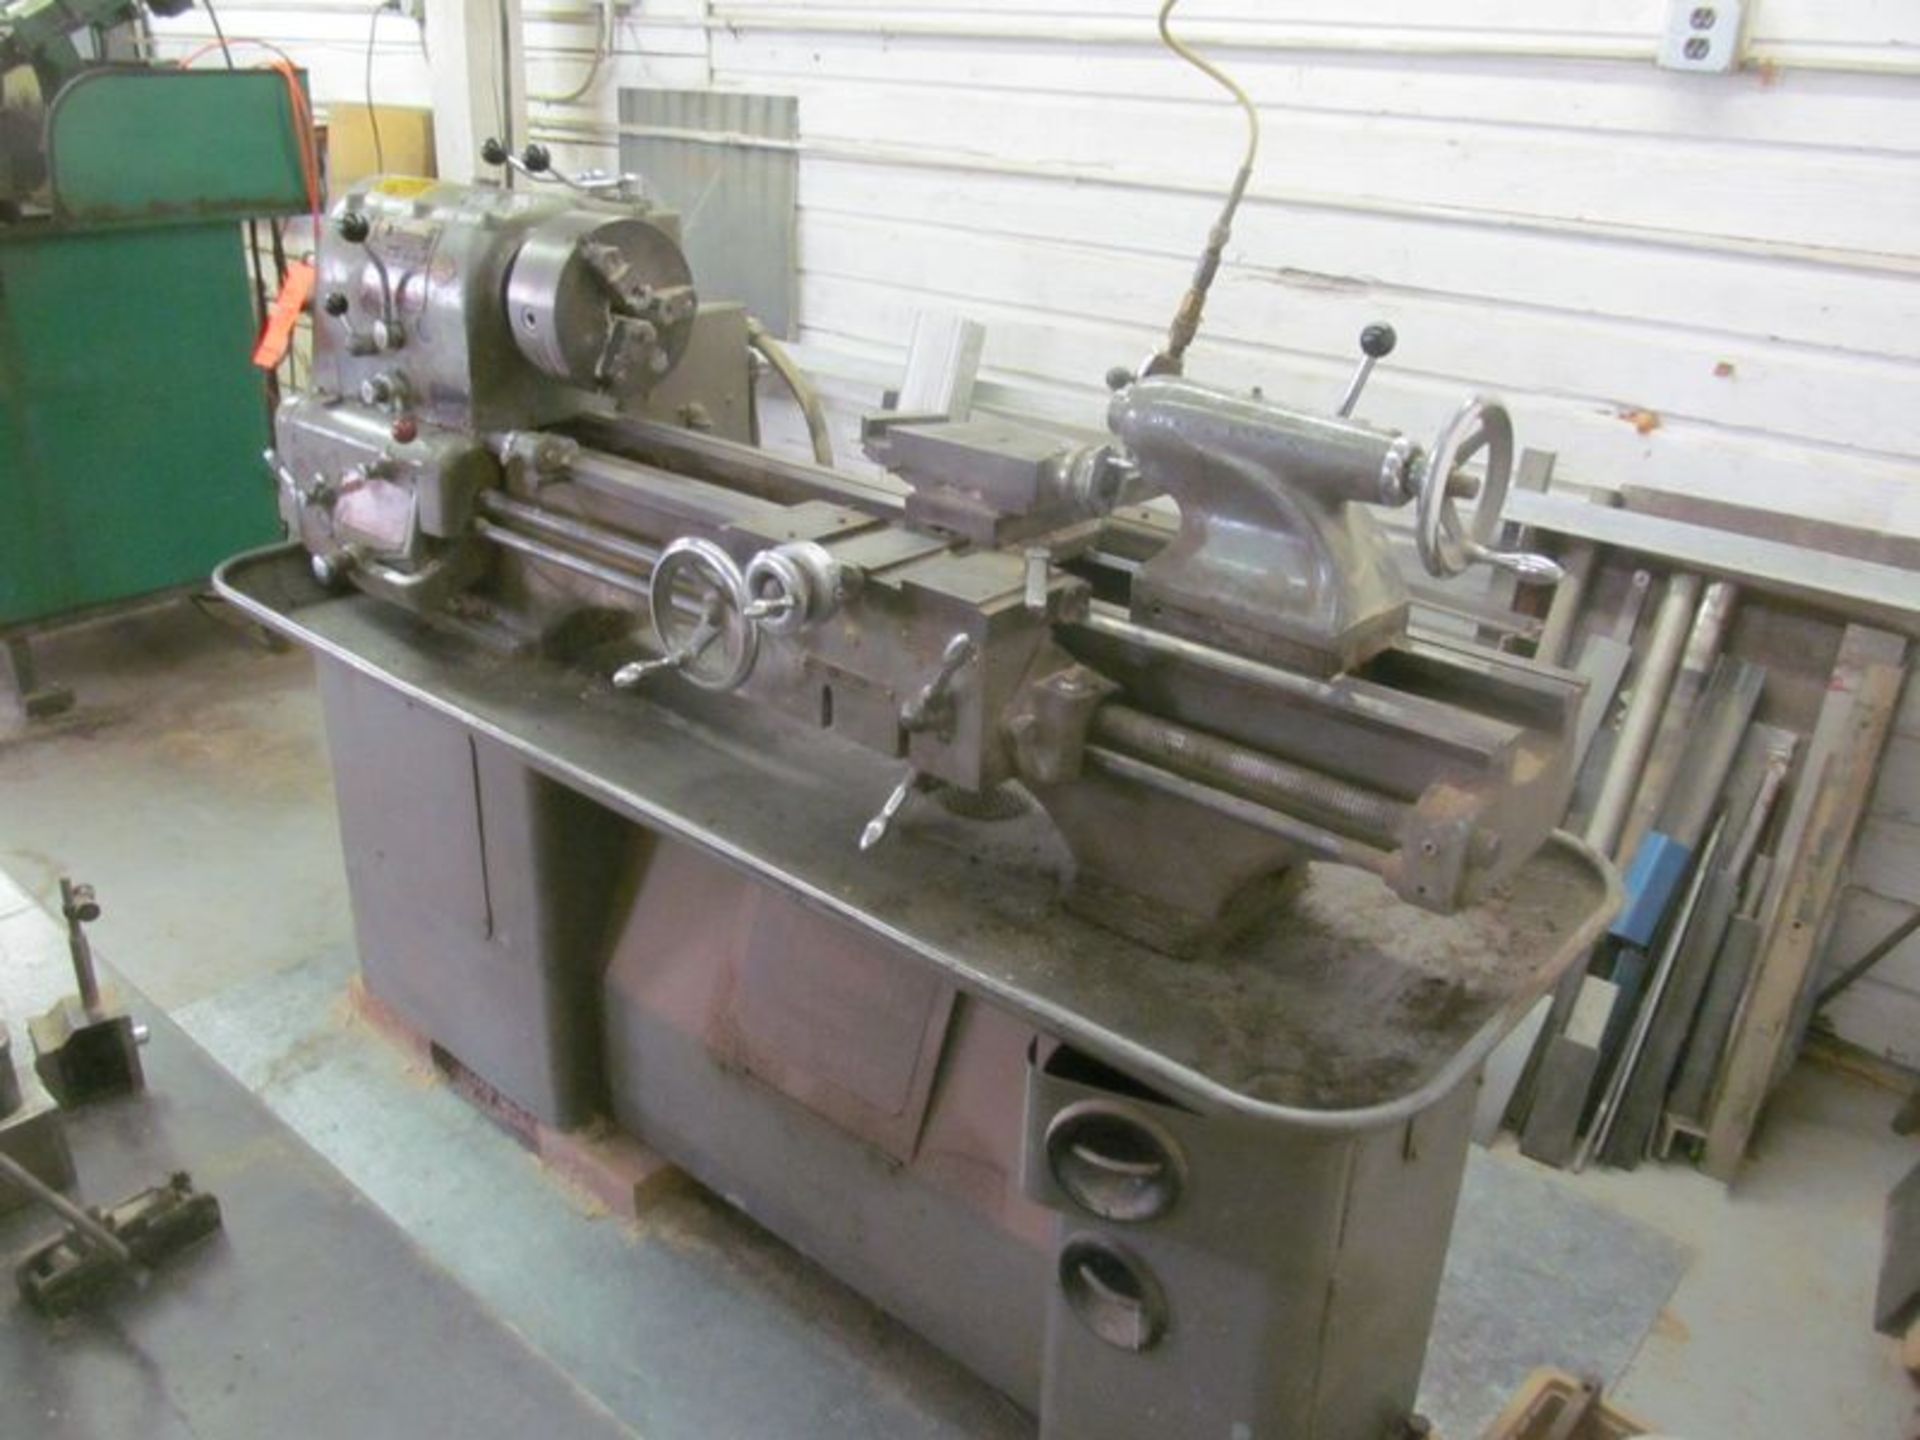 Clausing engine lathe, S/N 3/40231, with 13" swing X 32" BC, 8", 3-jaw chuck, and ass't tooling - Image 2 of 4